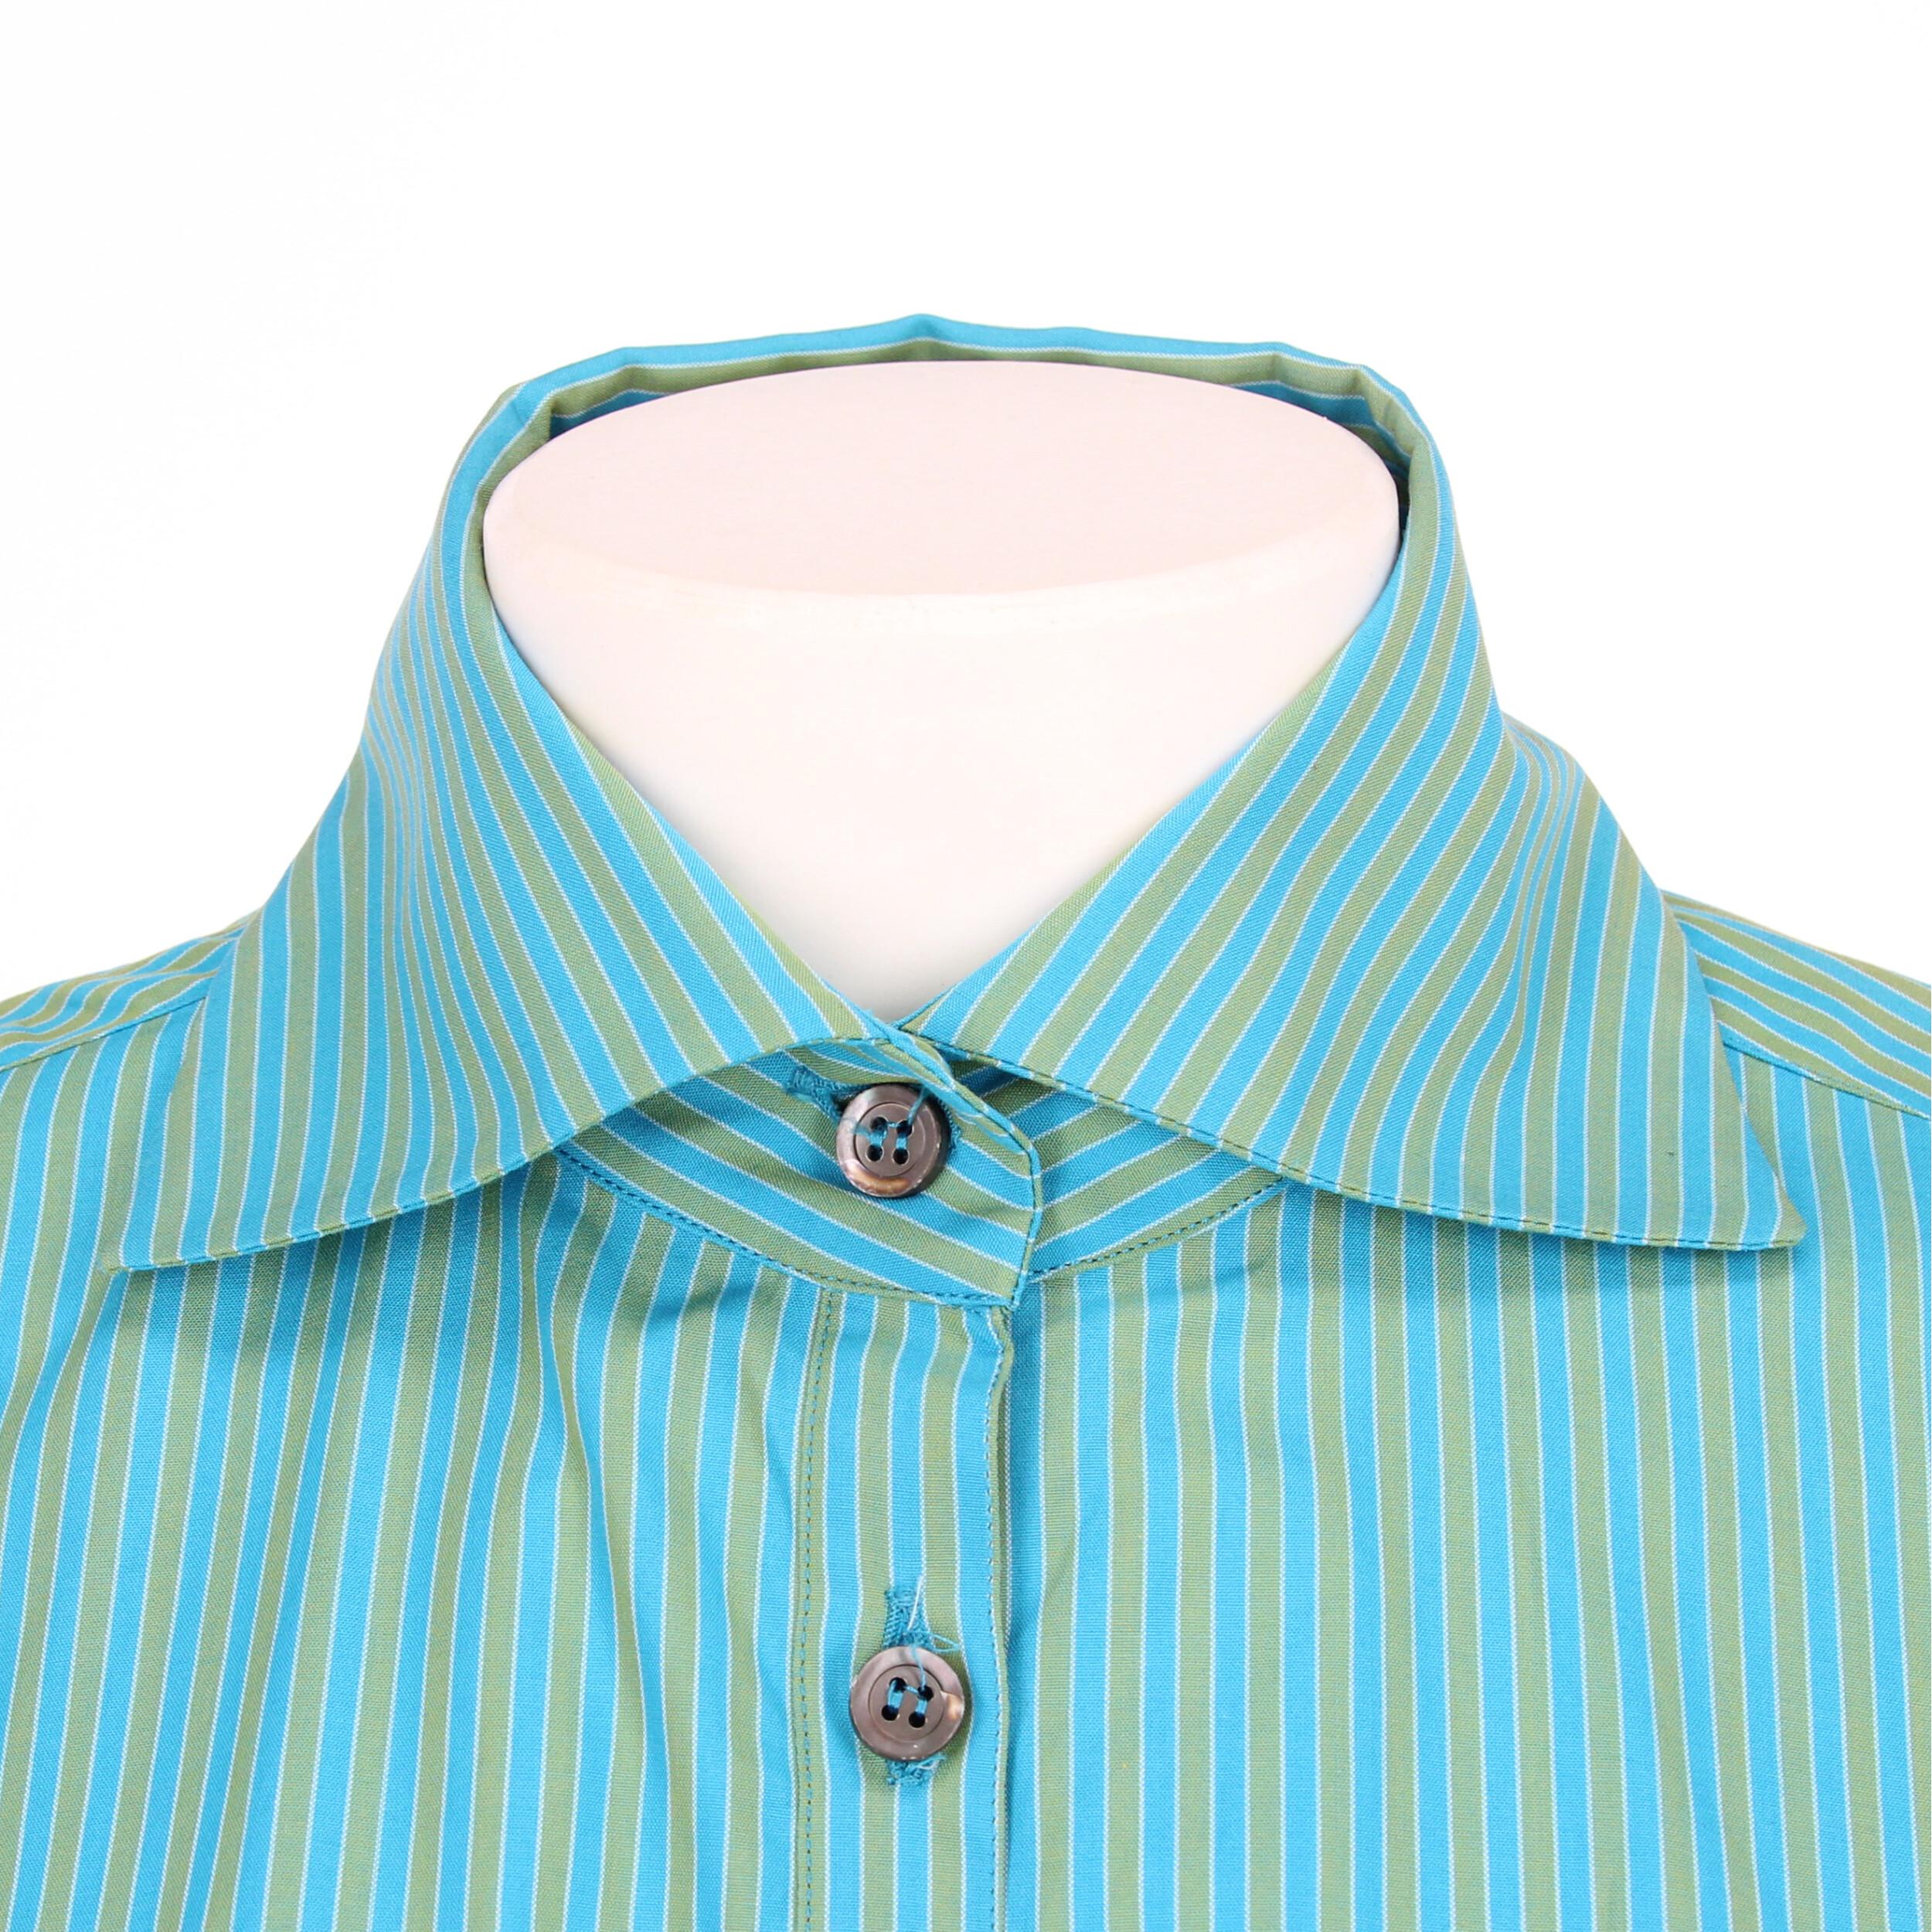 1990s Romeo Gigli light blue and green striped cotton shirt For Sale 2